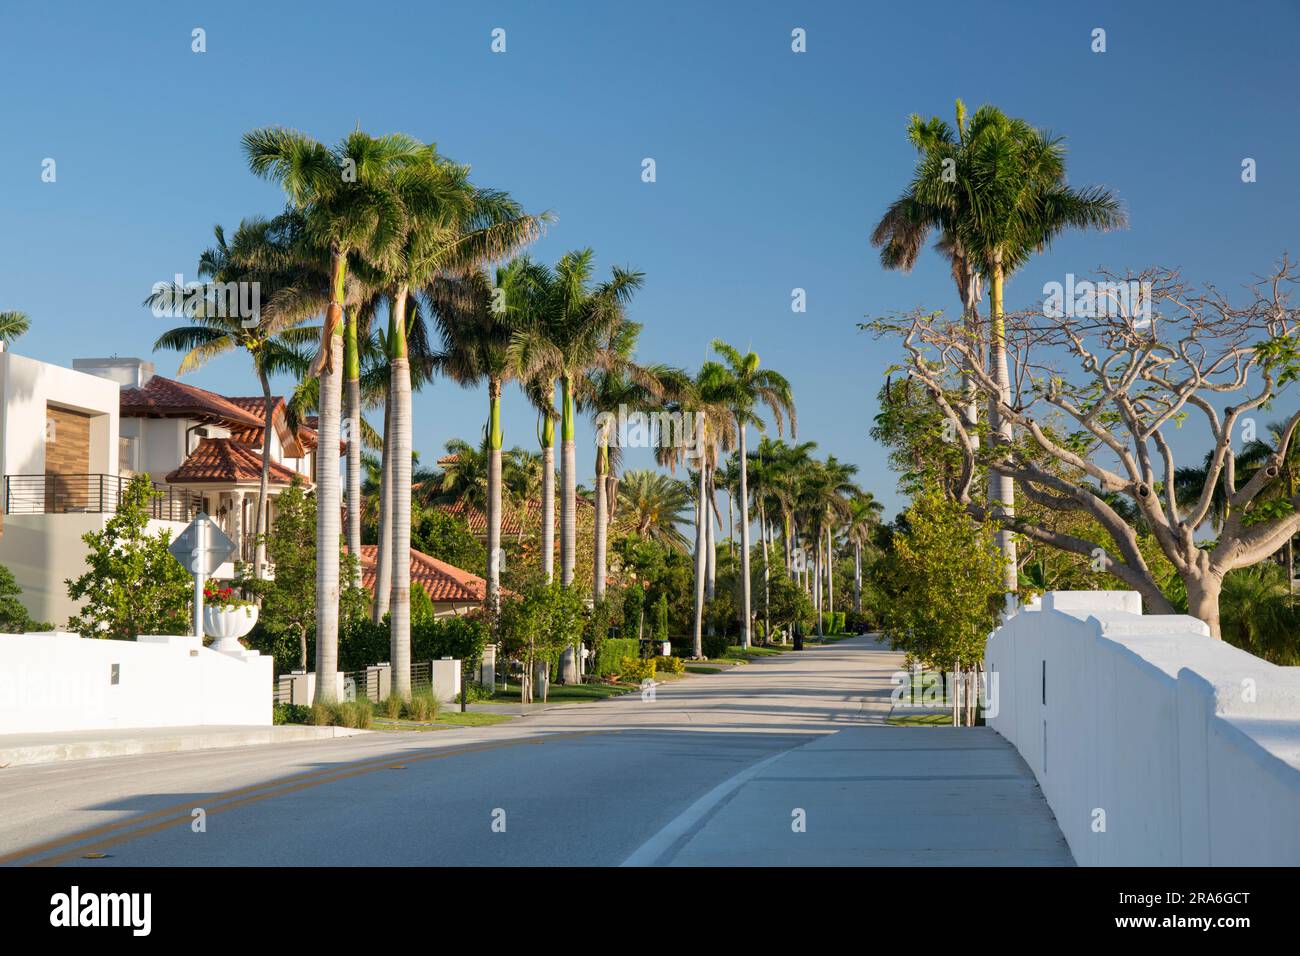 Fort Lauderdale, Florida, USA. View along exclusive Royal Palm Drive, a typical residential tree-lined avenue in the Nurmi Isles district. Stock Photo